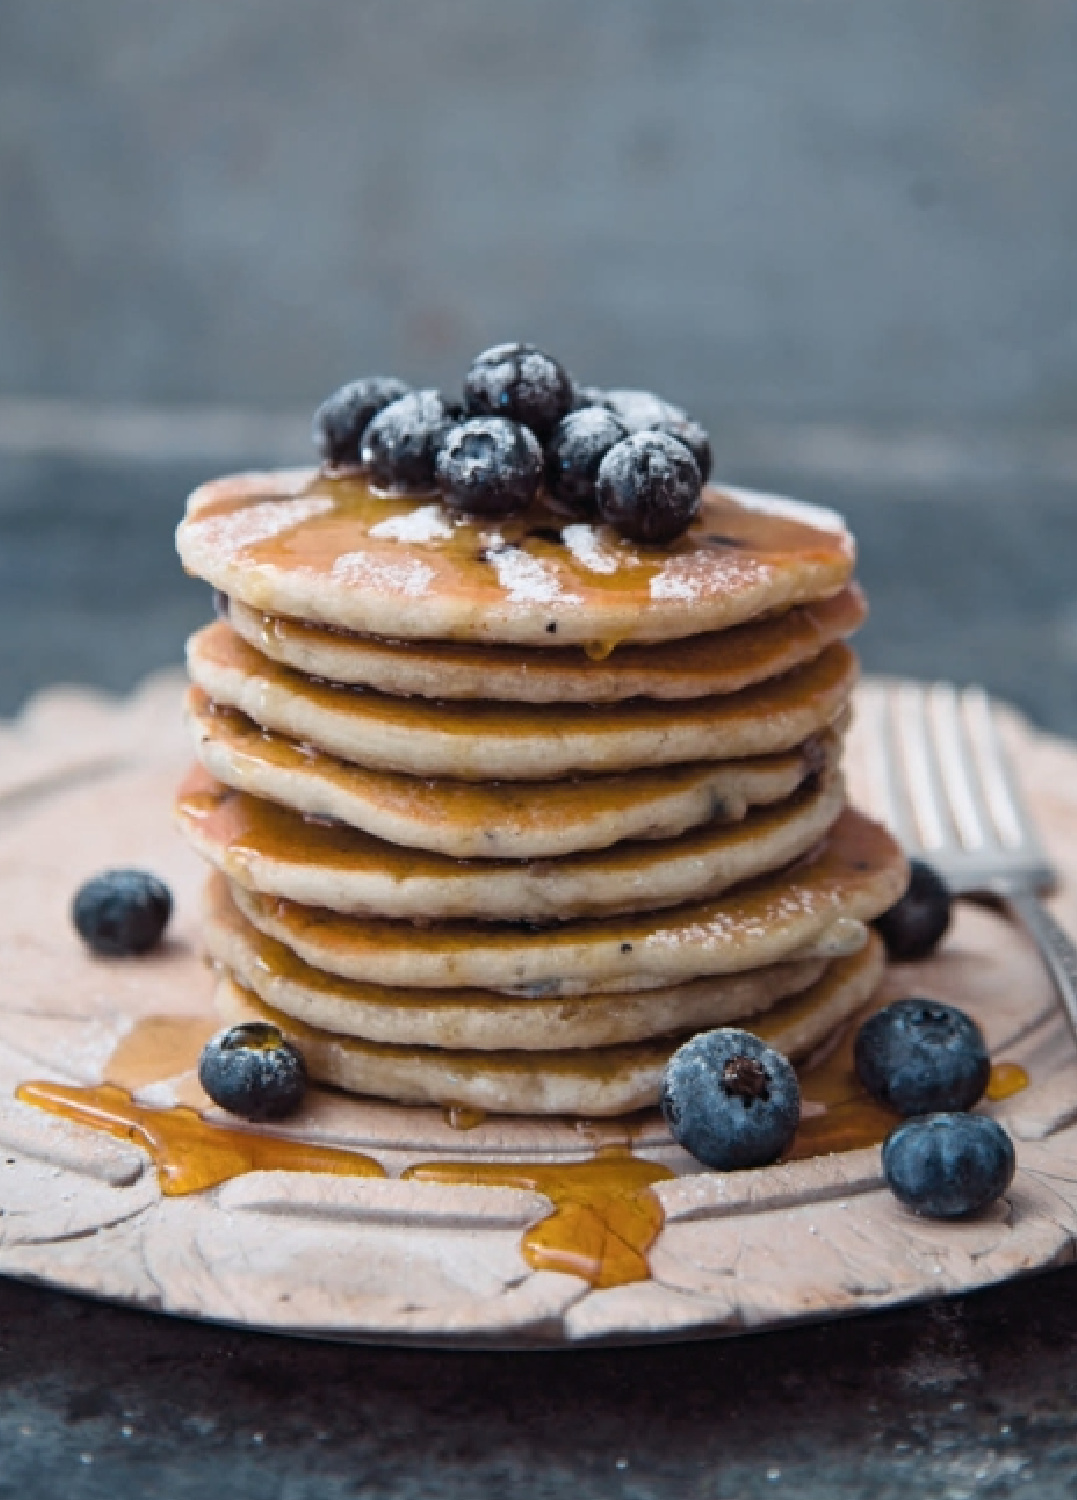 Gorgeous ricotta pancakes topped with blueberries in THE ART OF PANTRY COOKING by Ronda Carman (Rizzoli, 2022).